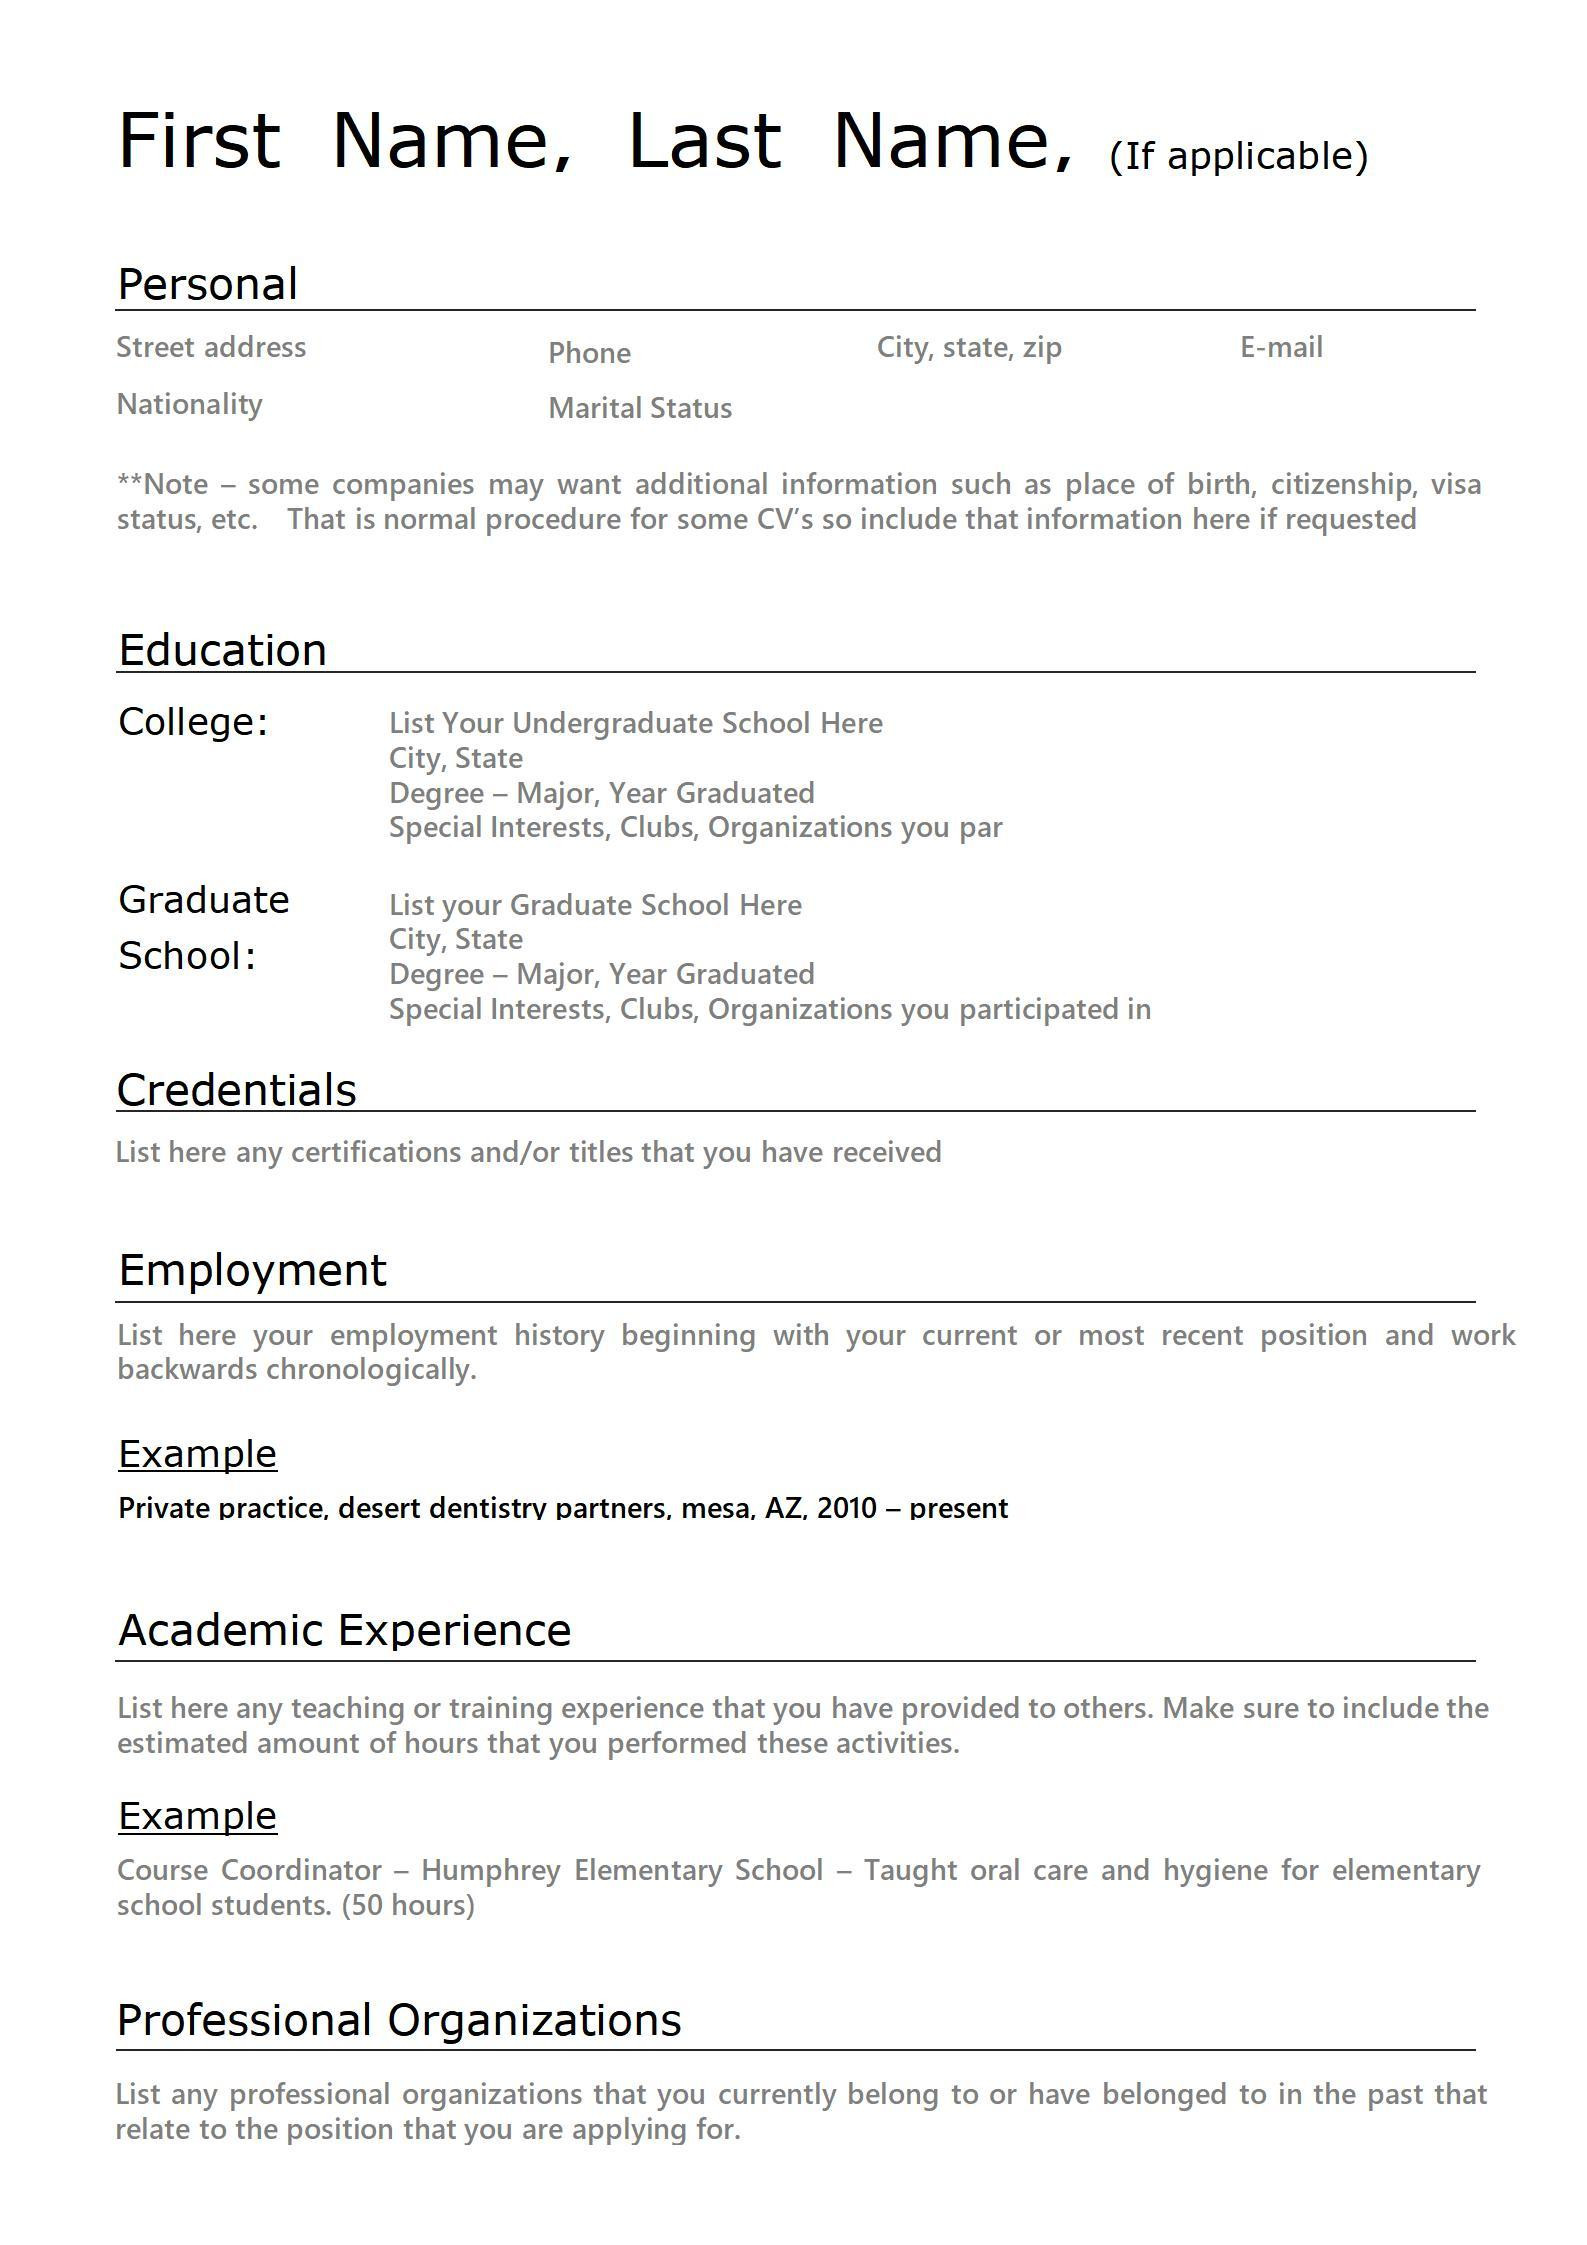 First Job Work Experience Resume Sample First-time Resume with No Experience Samples Wps Office Academy